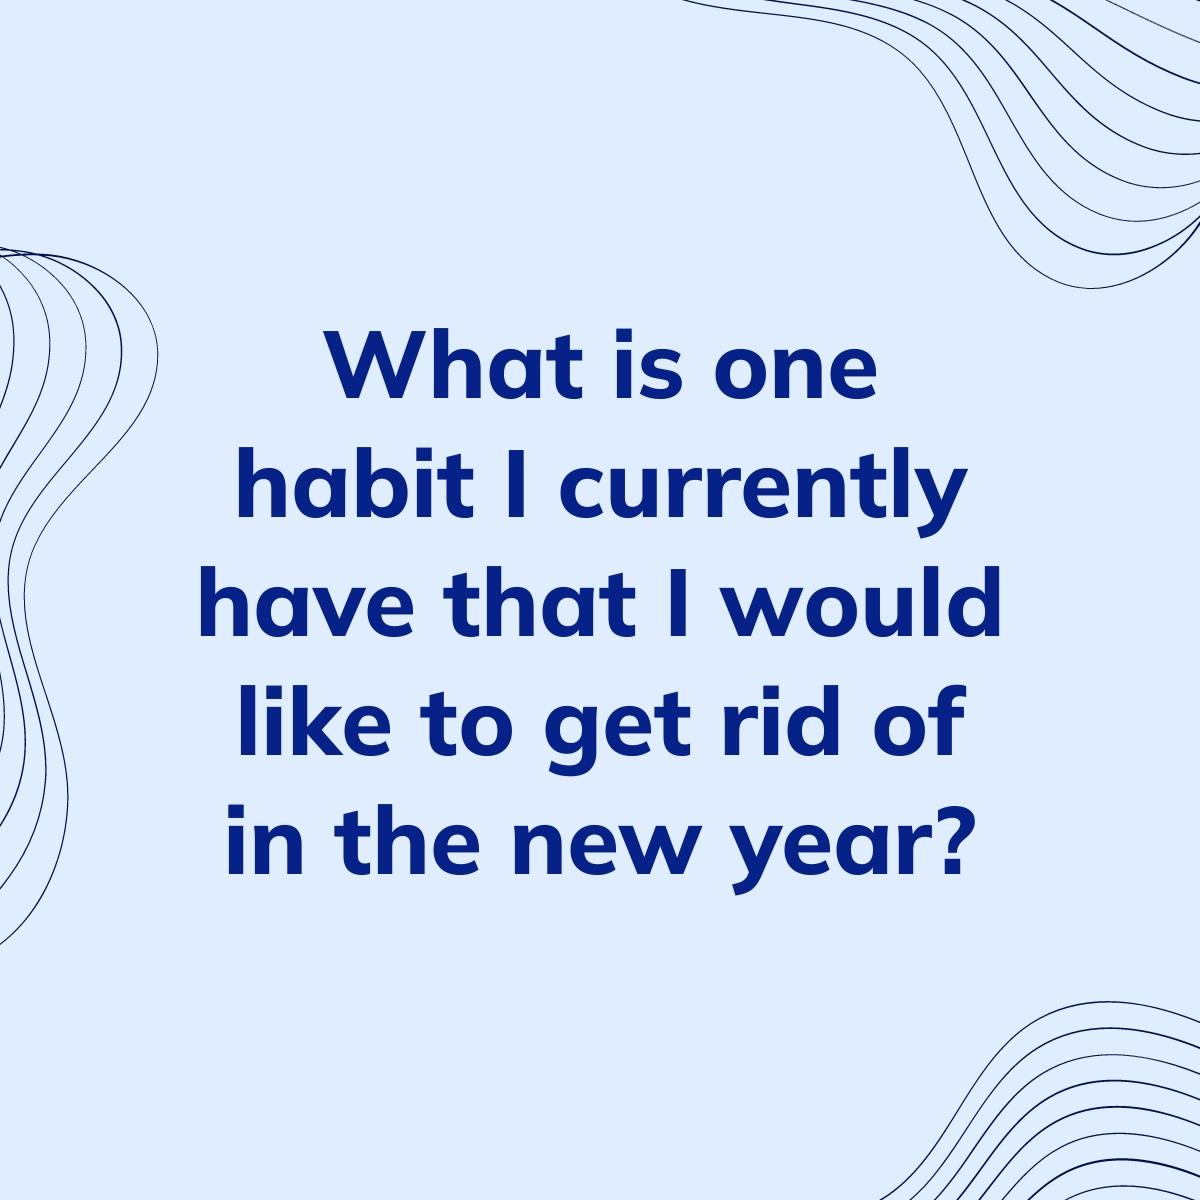 Journal Prompt: What is one habit I currently have that I would like to get rid of in the new year?